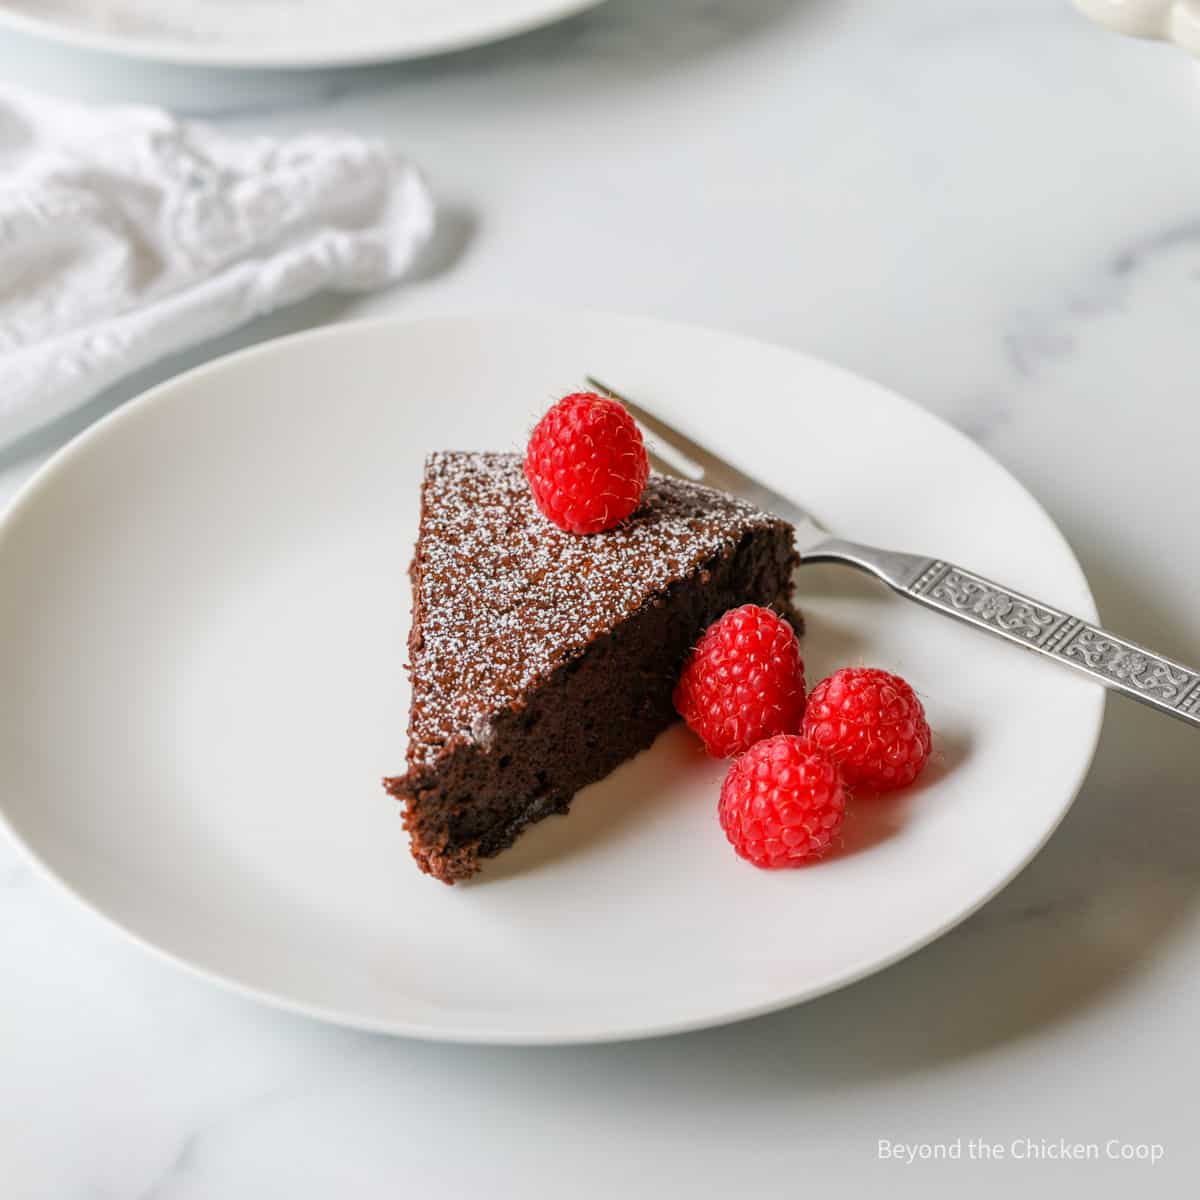 A slice of chocolate cake topped with powdered sugar and raspberries.